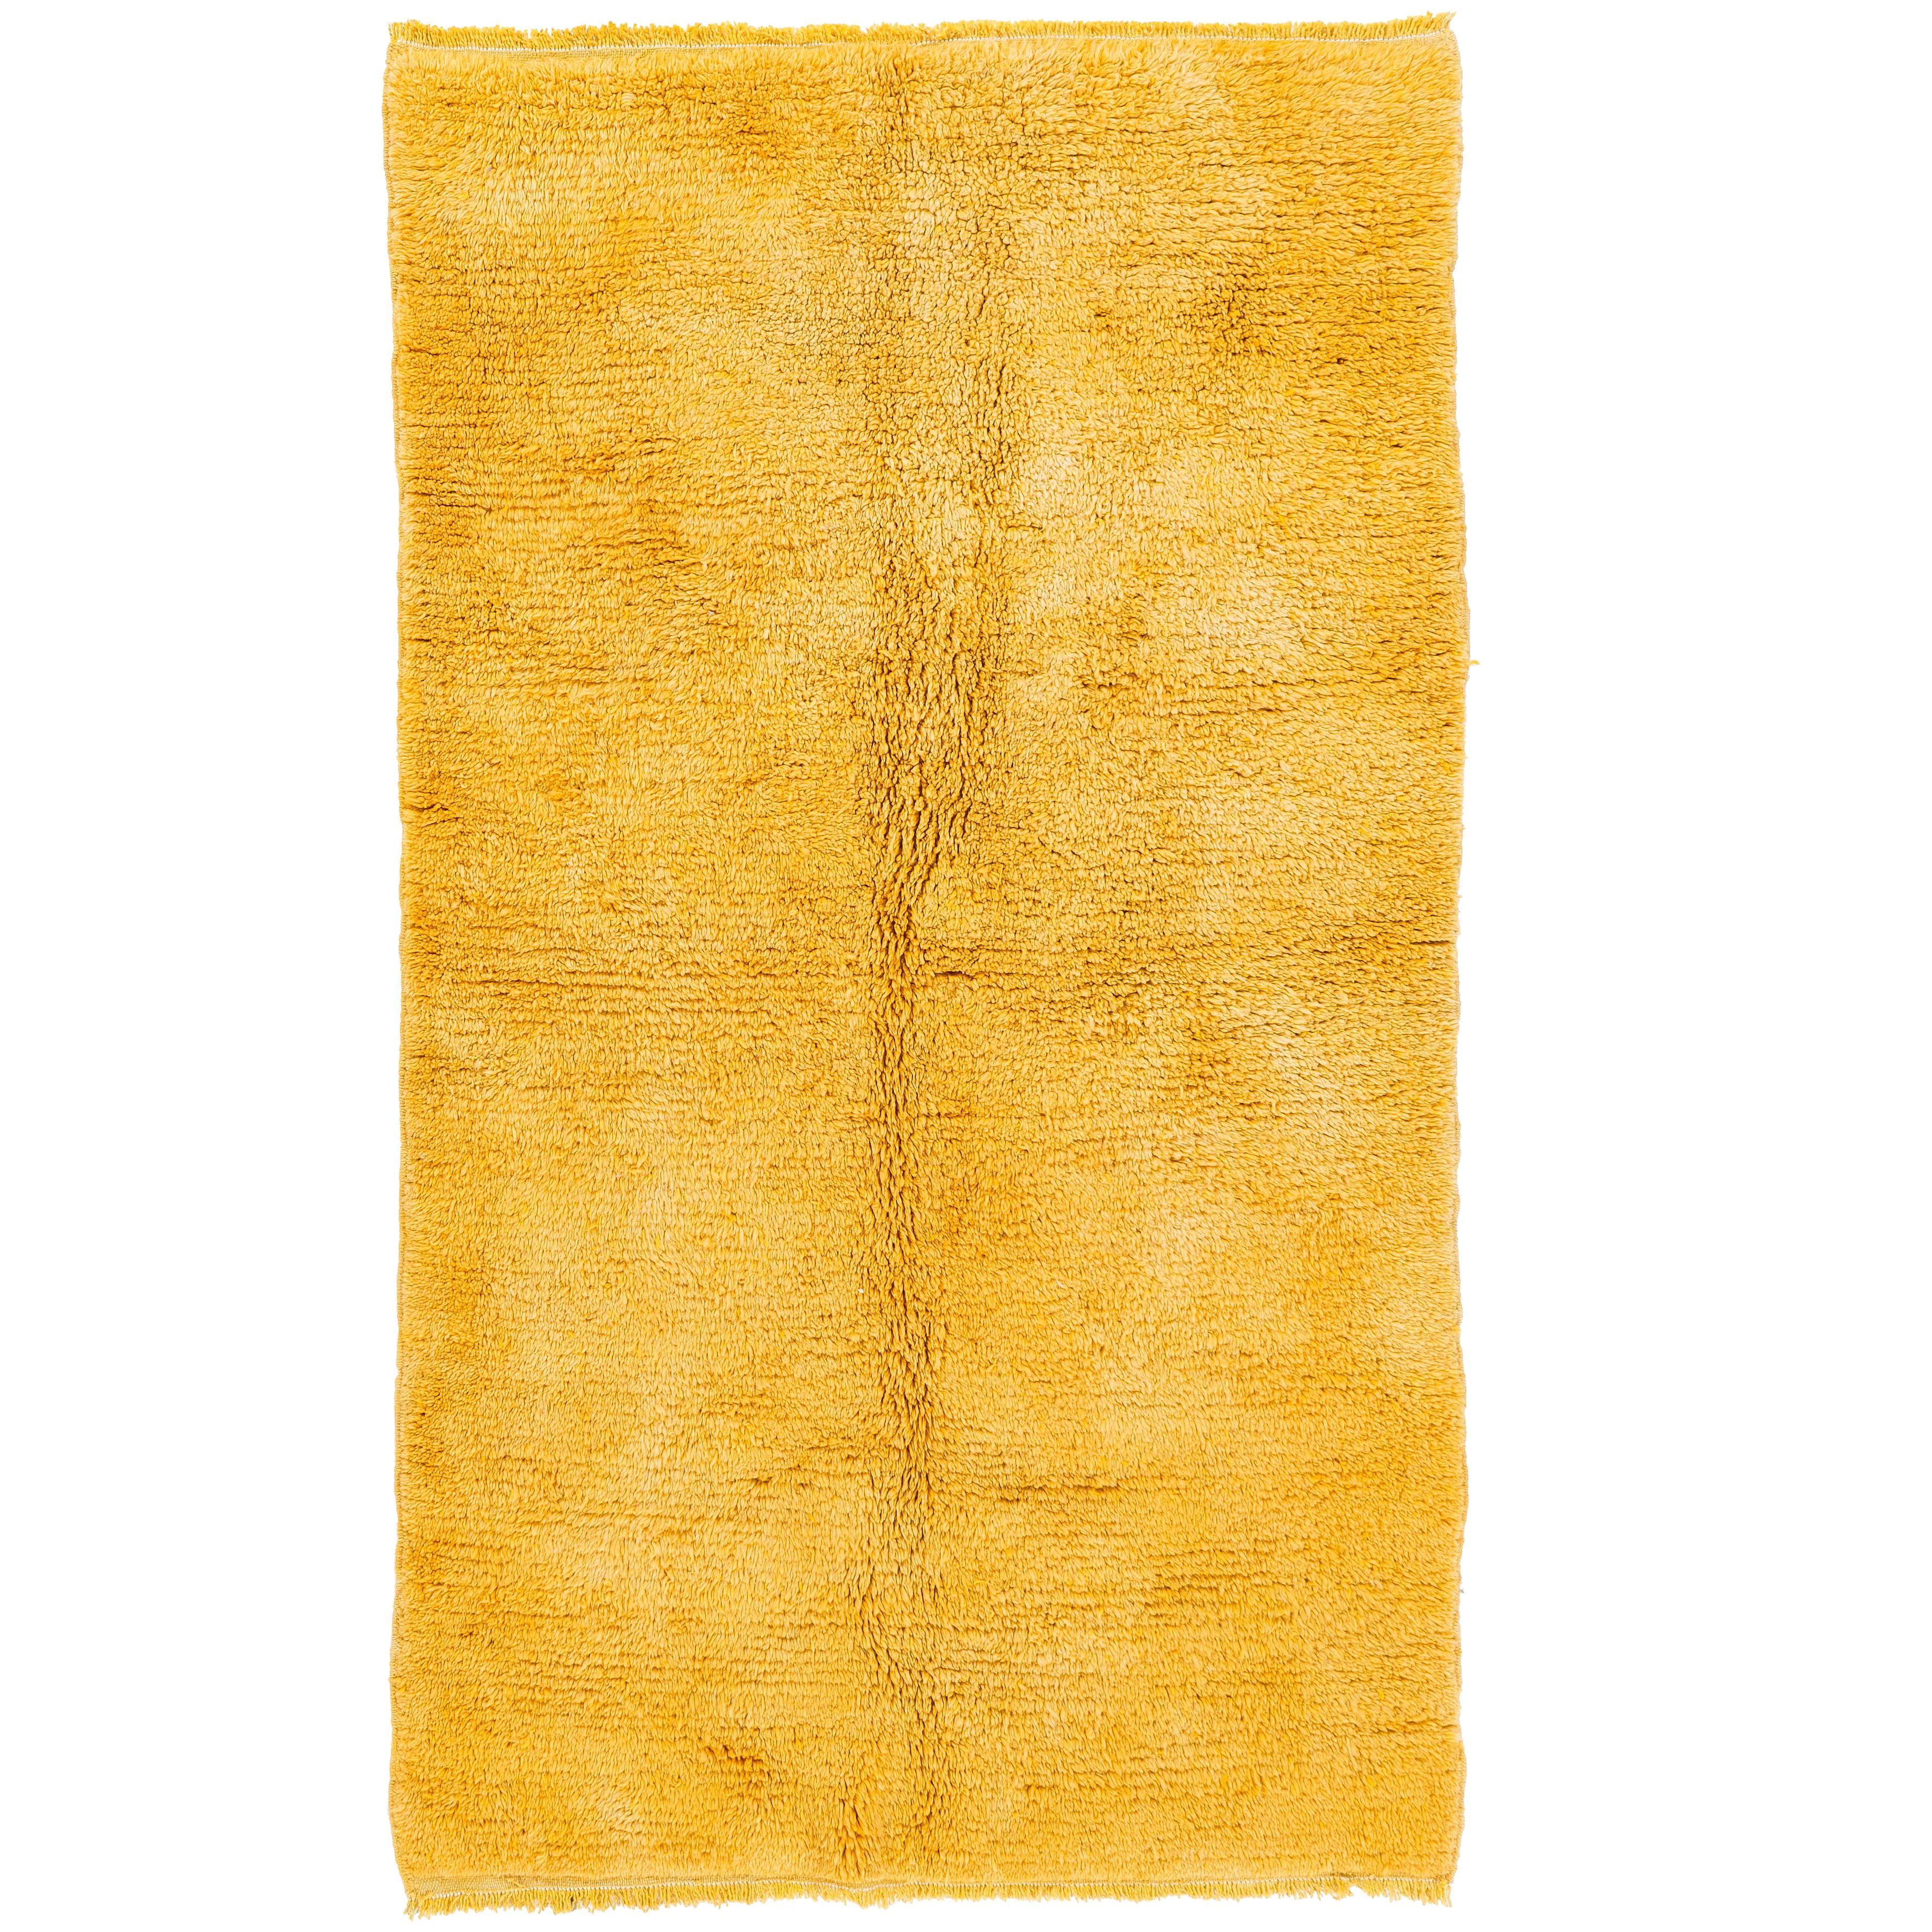 Plain Tulu Rug in Solid Yellow Color